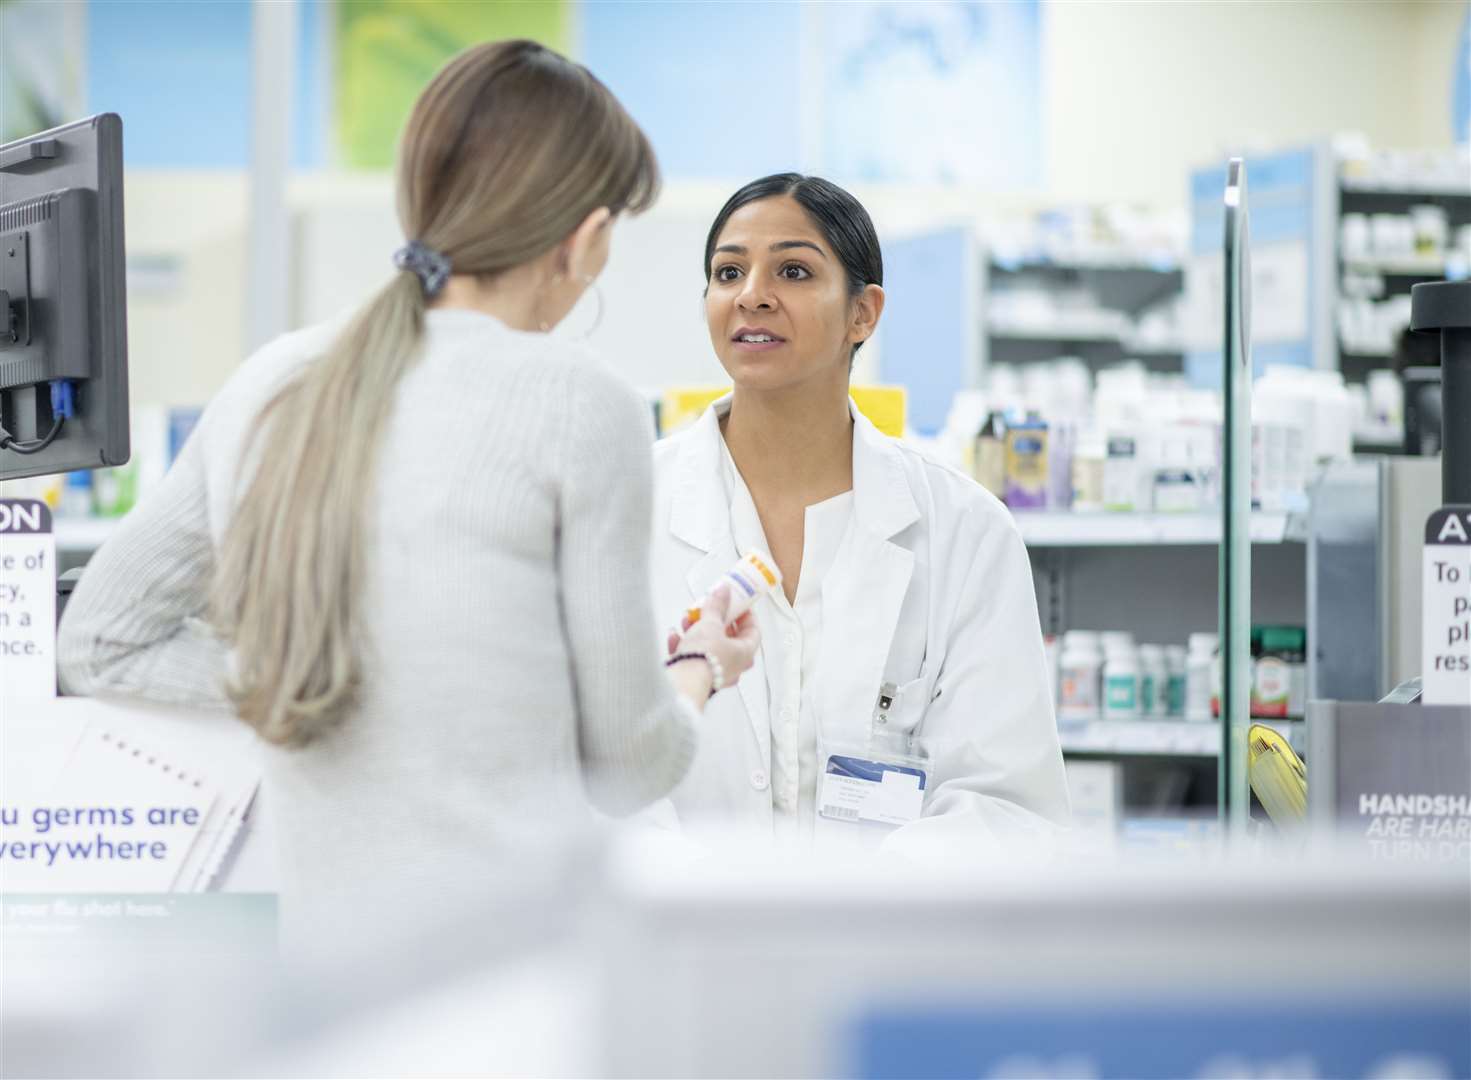 NHS prescription charges are increasing in April. Image: iStock.